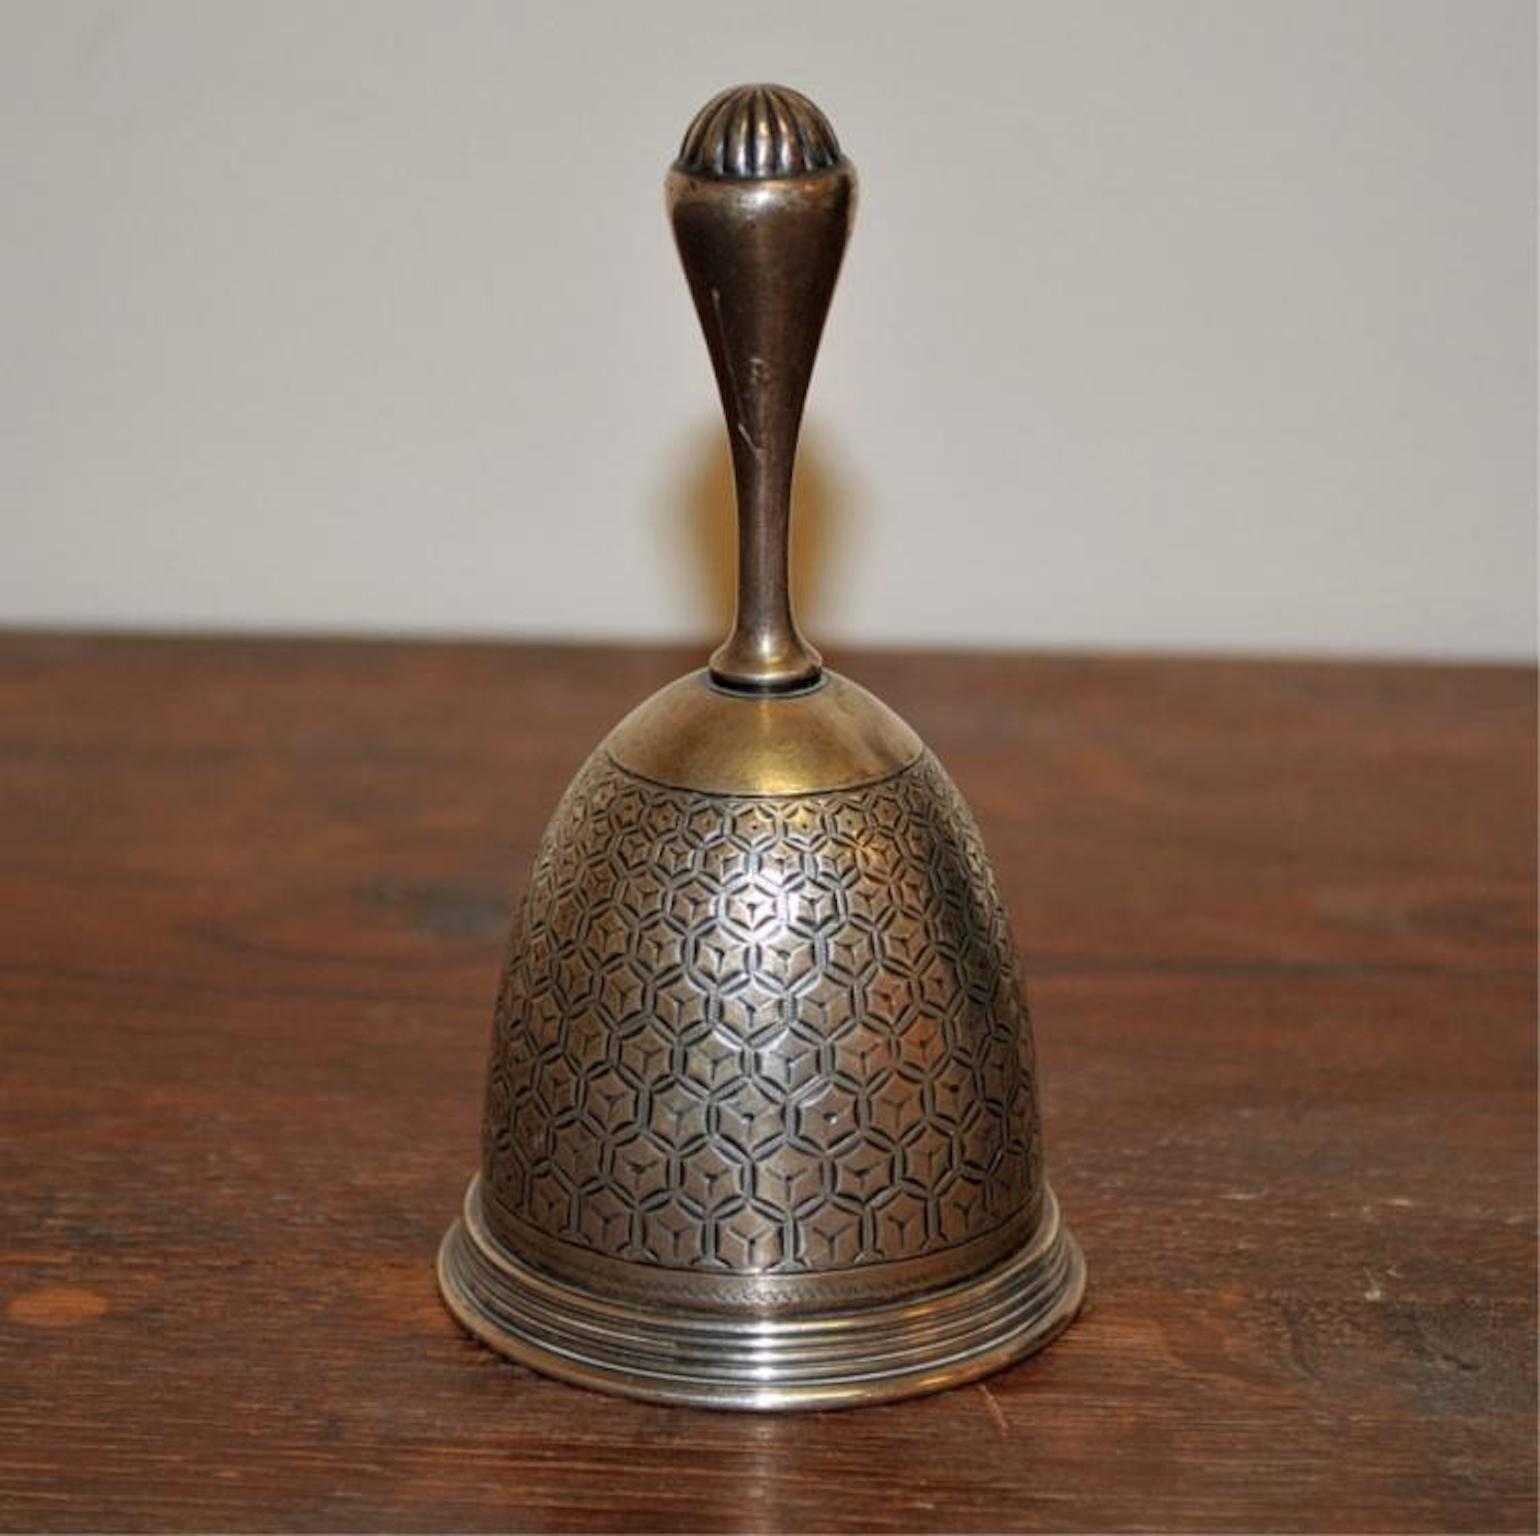 Antique Tiffany & Co. sterling bell with handle. 126.3 grams total weight, sterling clapper has been replaced with brass, 4 1/2" H x 2 1/4" diameter. Very good condition.